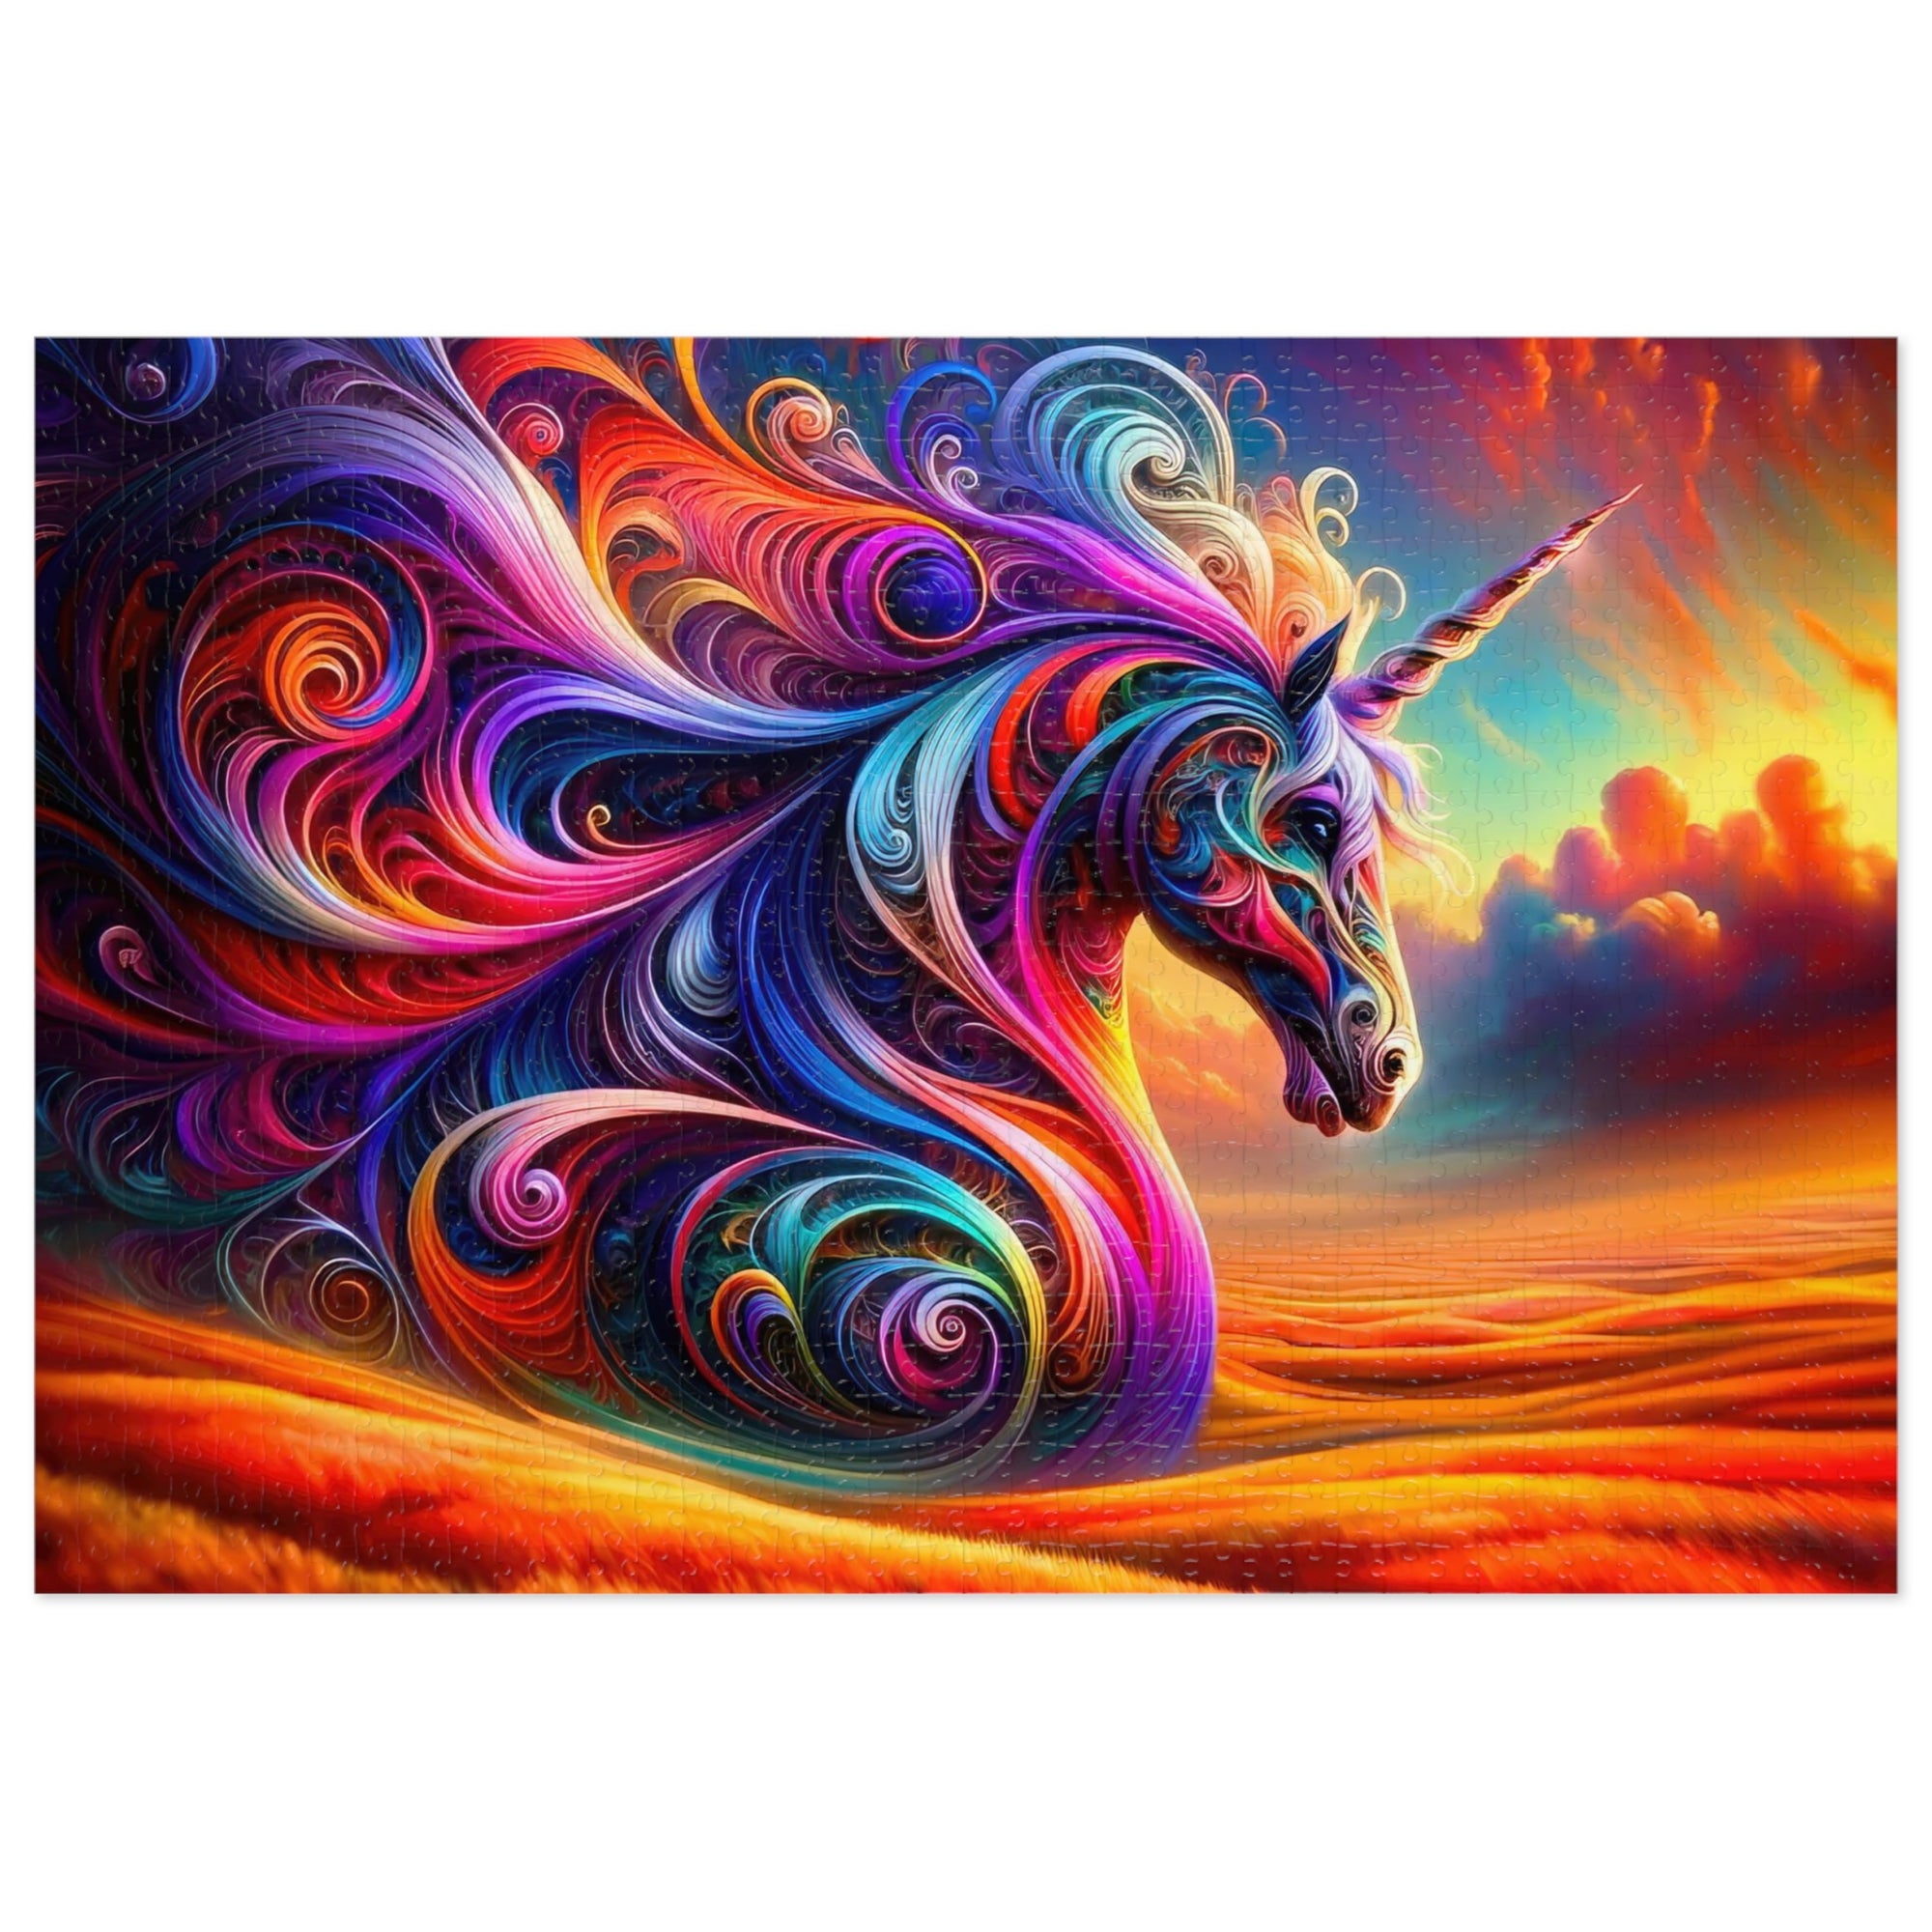 The Chromatic Chronicles of a Celestial Steed Jigsaw Puzzle